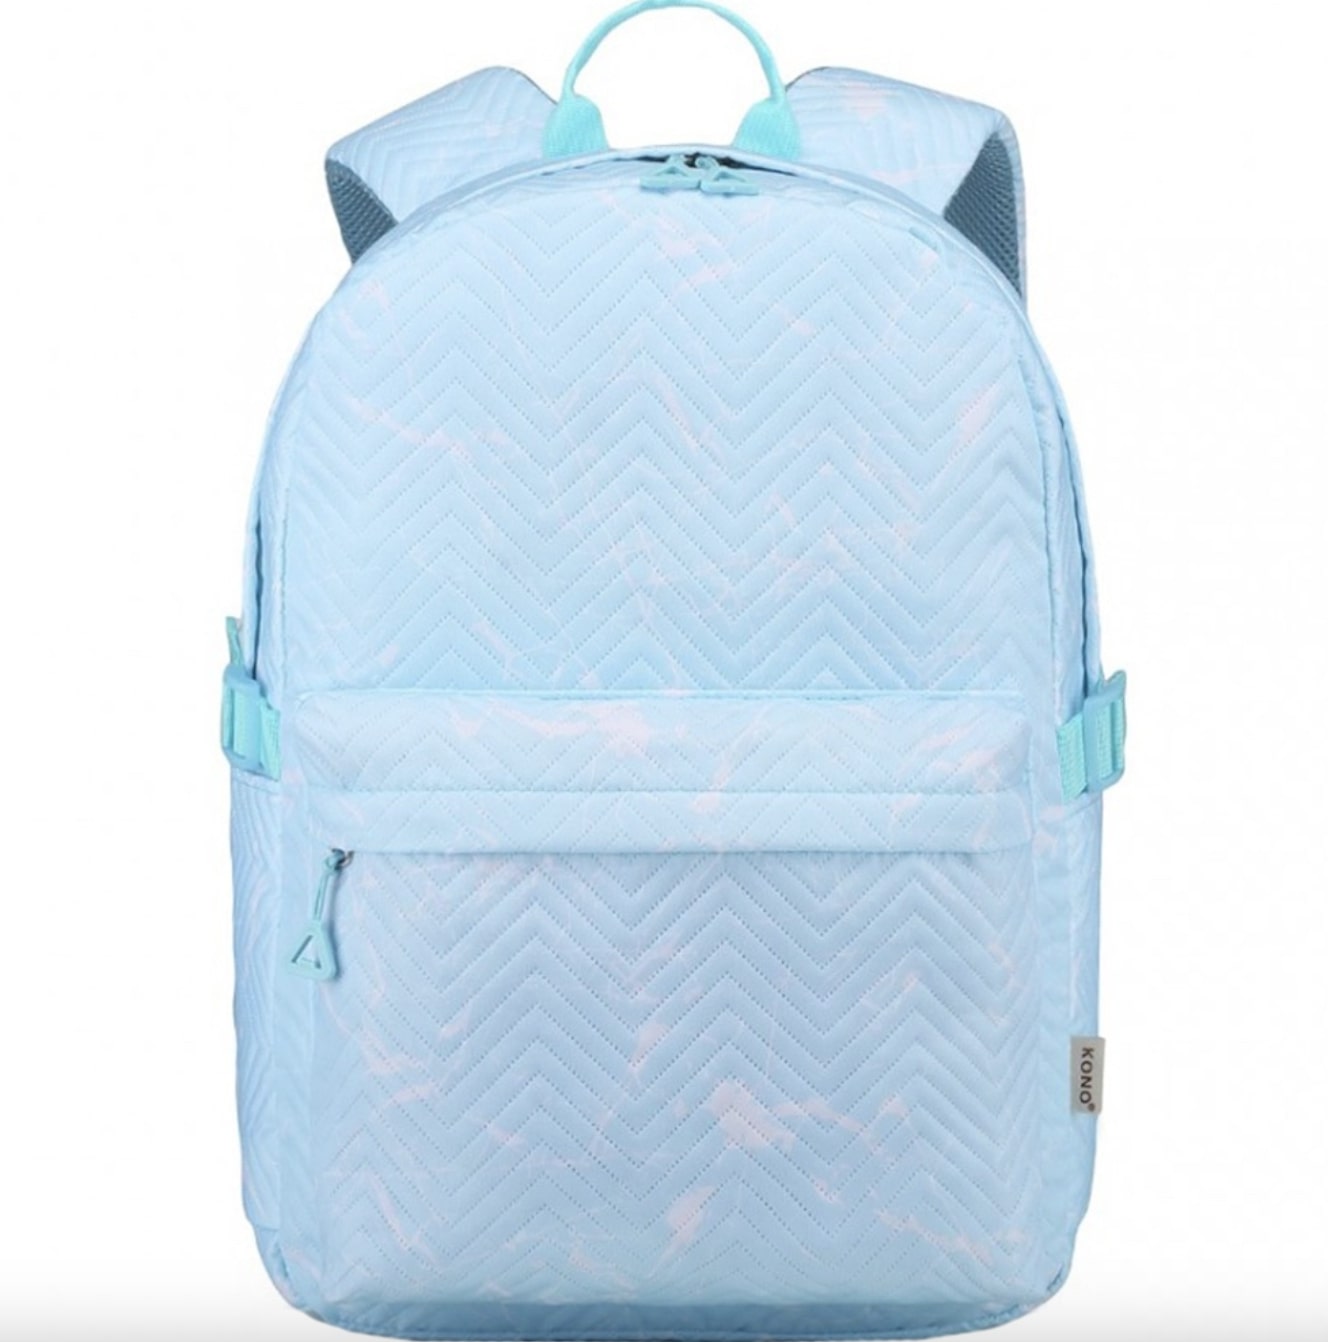 The art of displaying backpacks – retail strategies that inspire